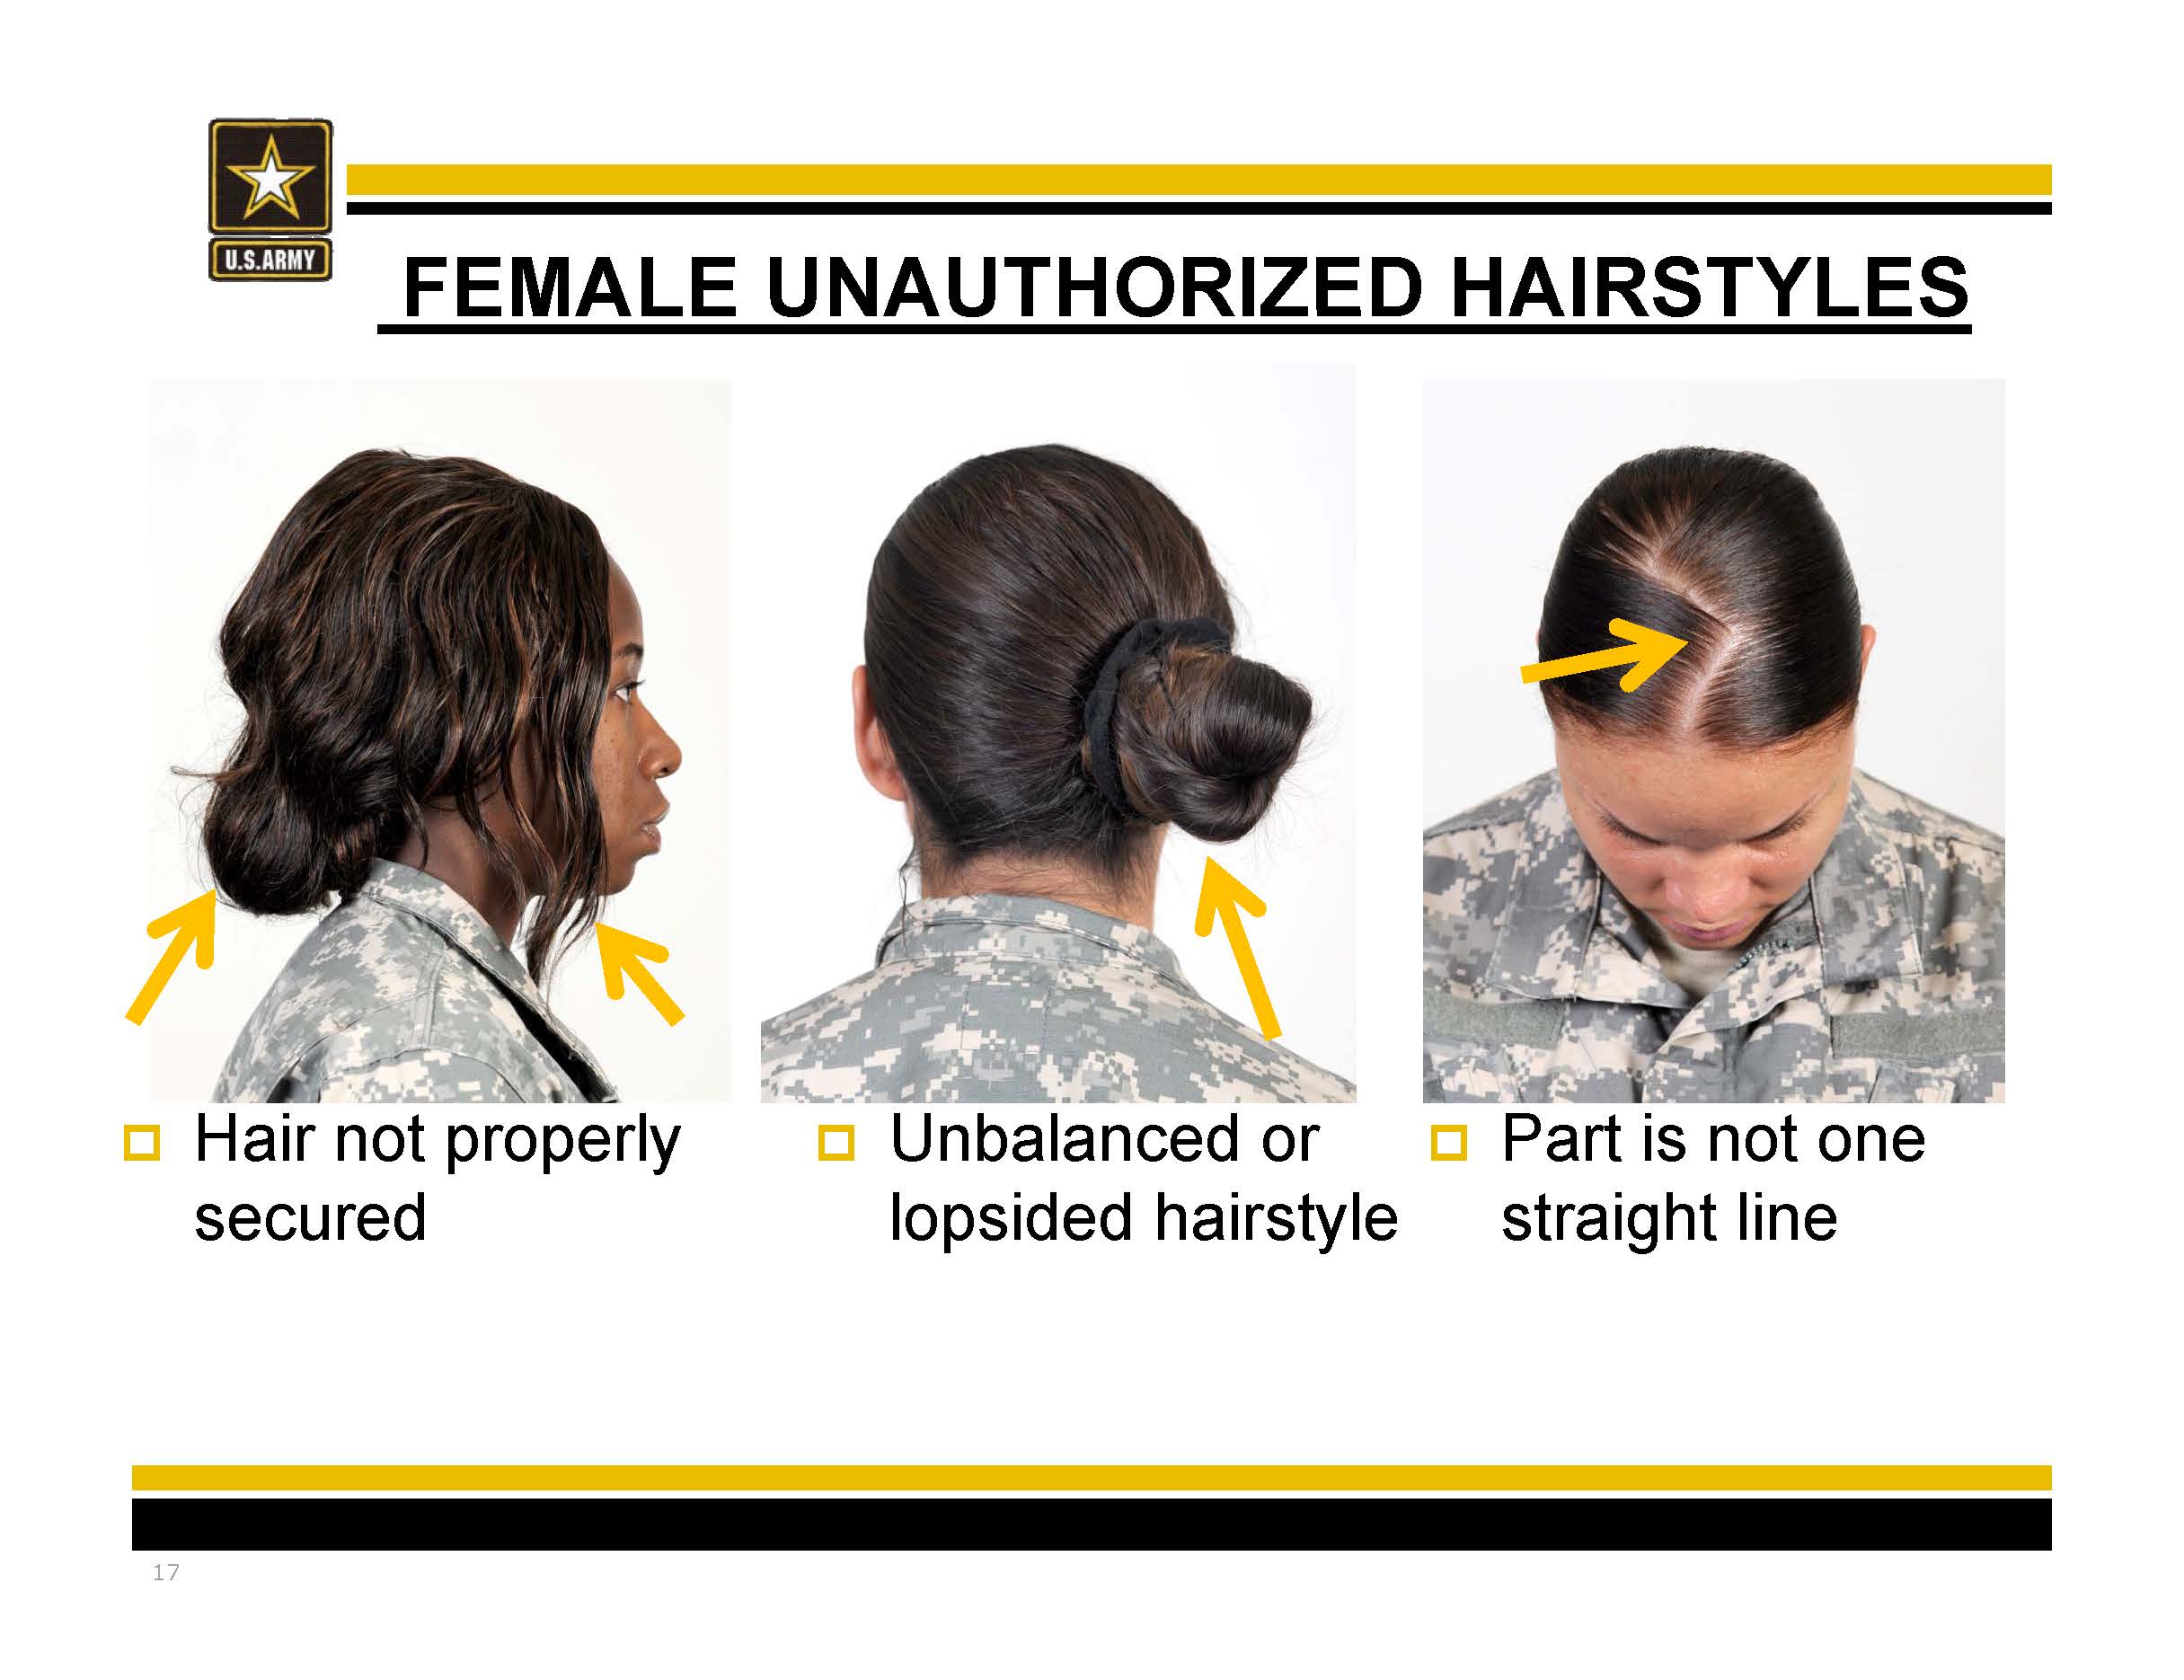 Army's ban on dreadlocks, other styles offends some African Americans | CNN  Politics